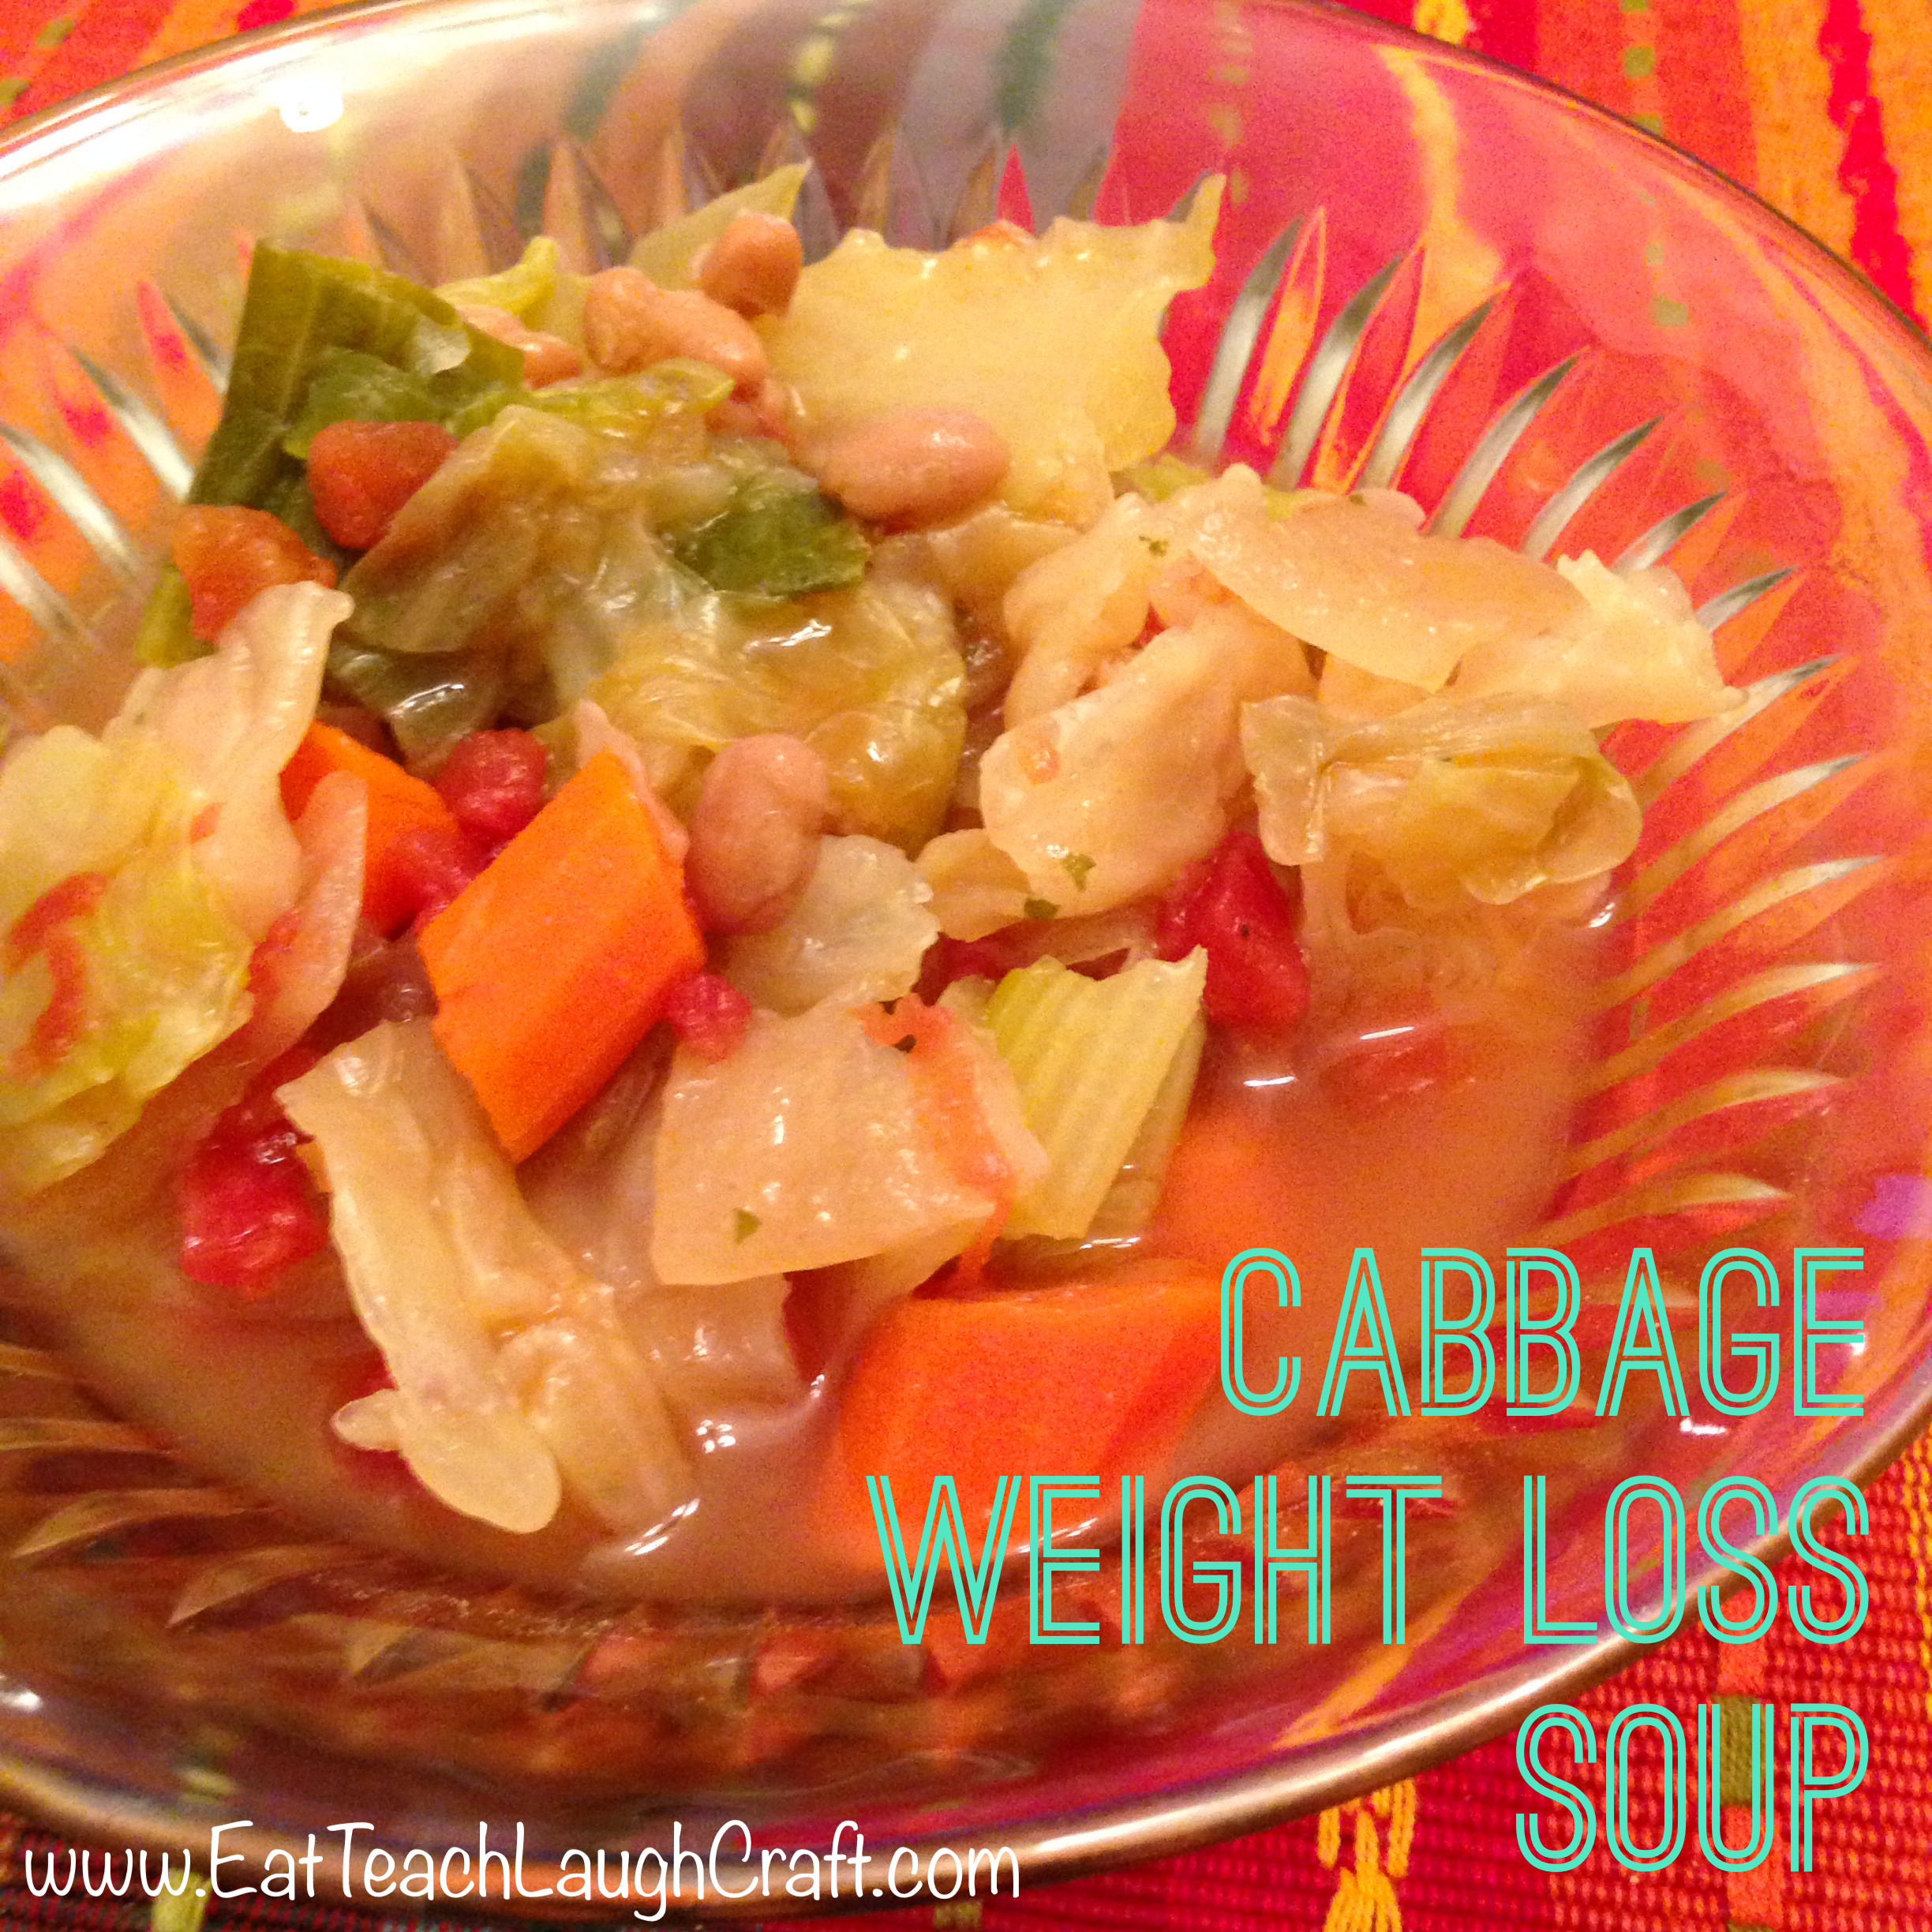 Weight Loss Soup Recipes
 Cabbage Weight Loss Soup Recipe Eat Teach Laugh Craft